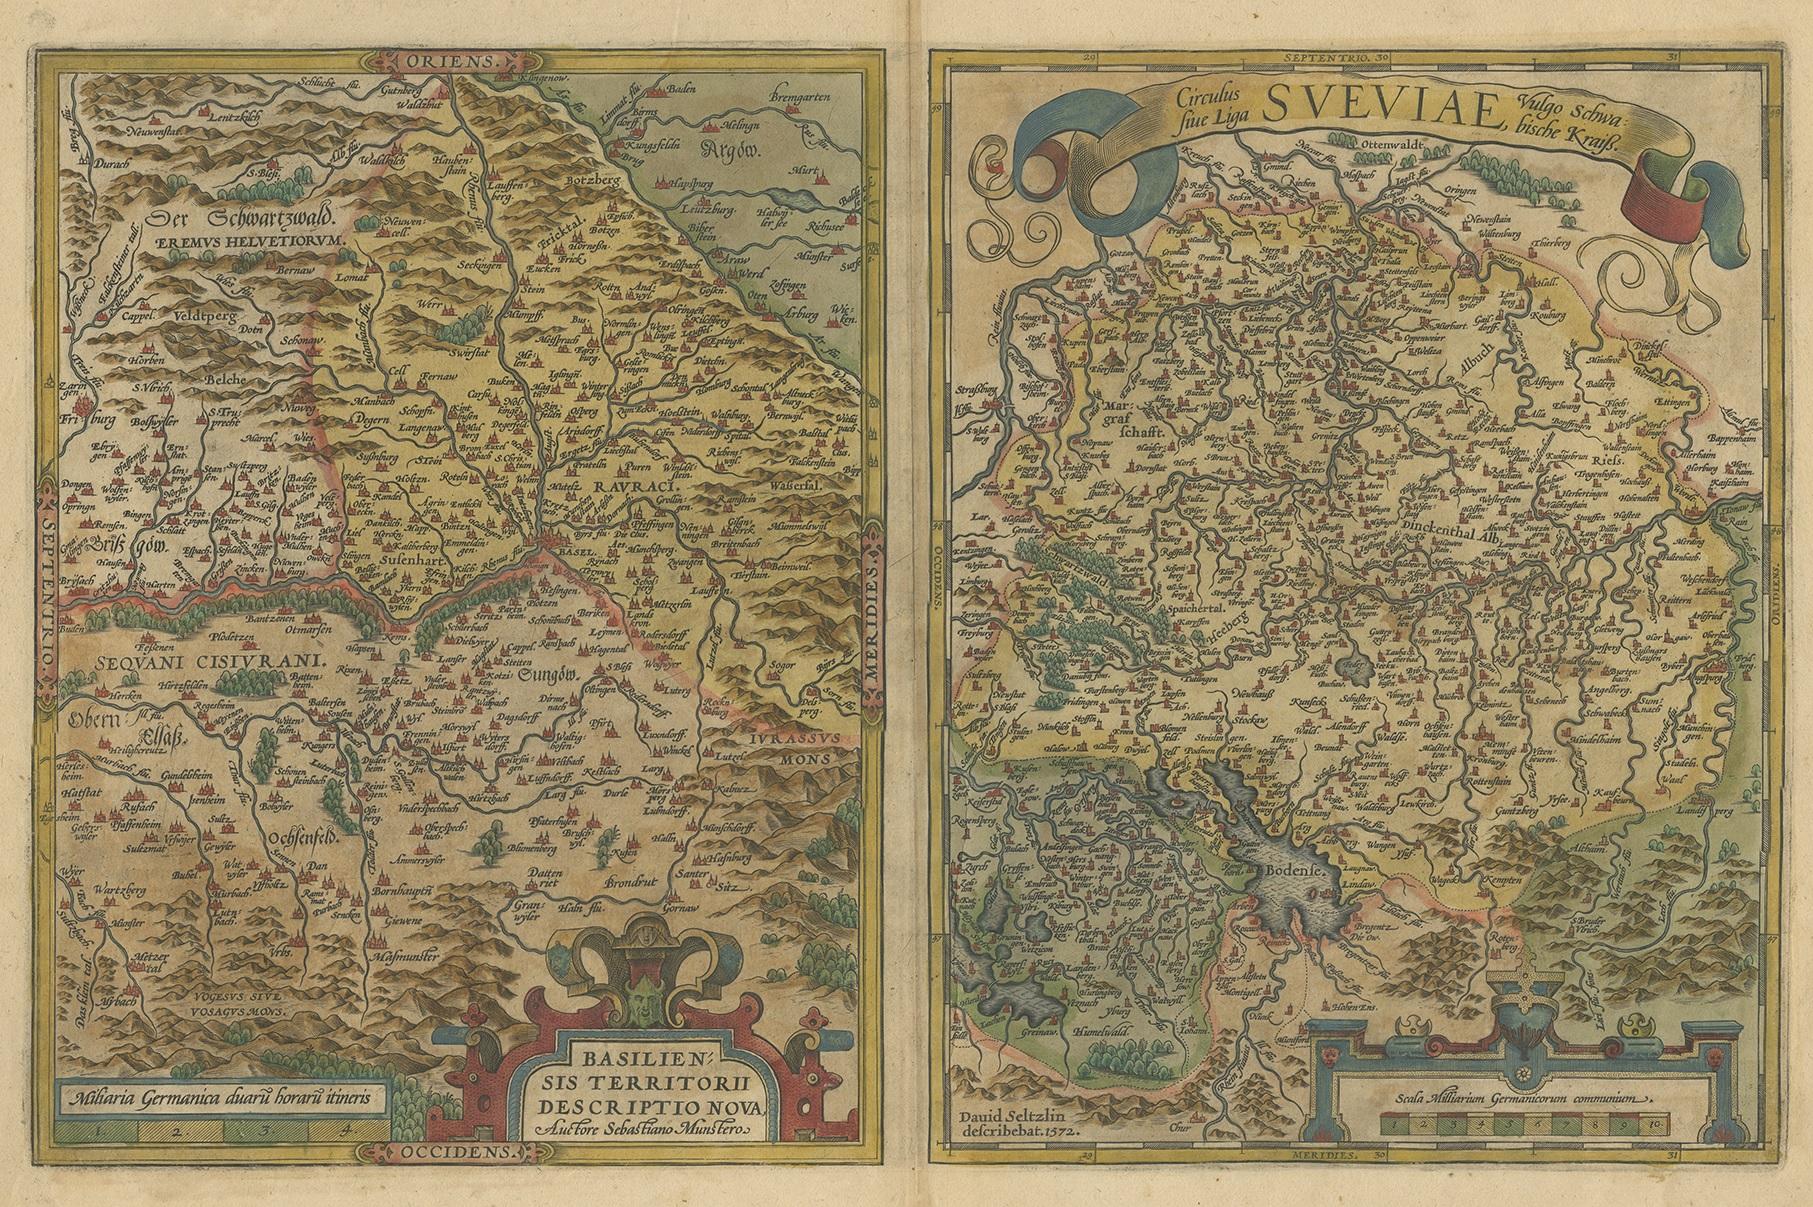 Two original antique maps on one sheet titled 'Basiliensis Territorii Descriptio Nova [with] Circulus sive Liga Sueviae'. The first centers on Basel, Switzerland, located on the Rhine River, and is based on Munster's map of 1538. The second map is